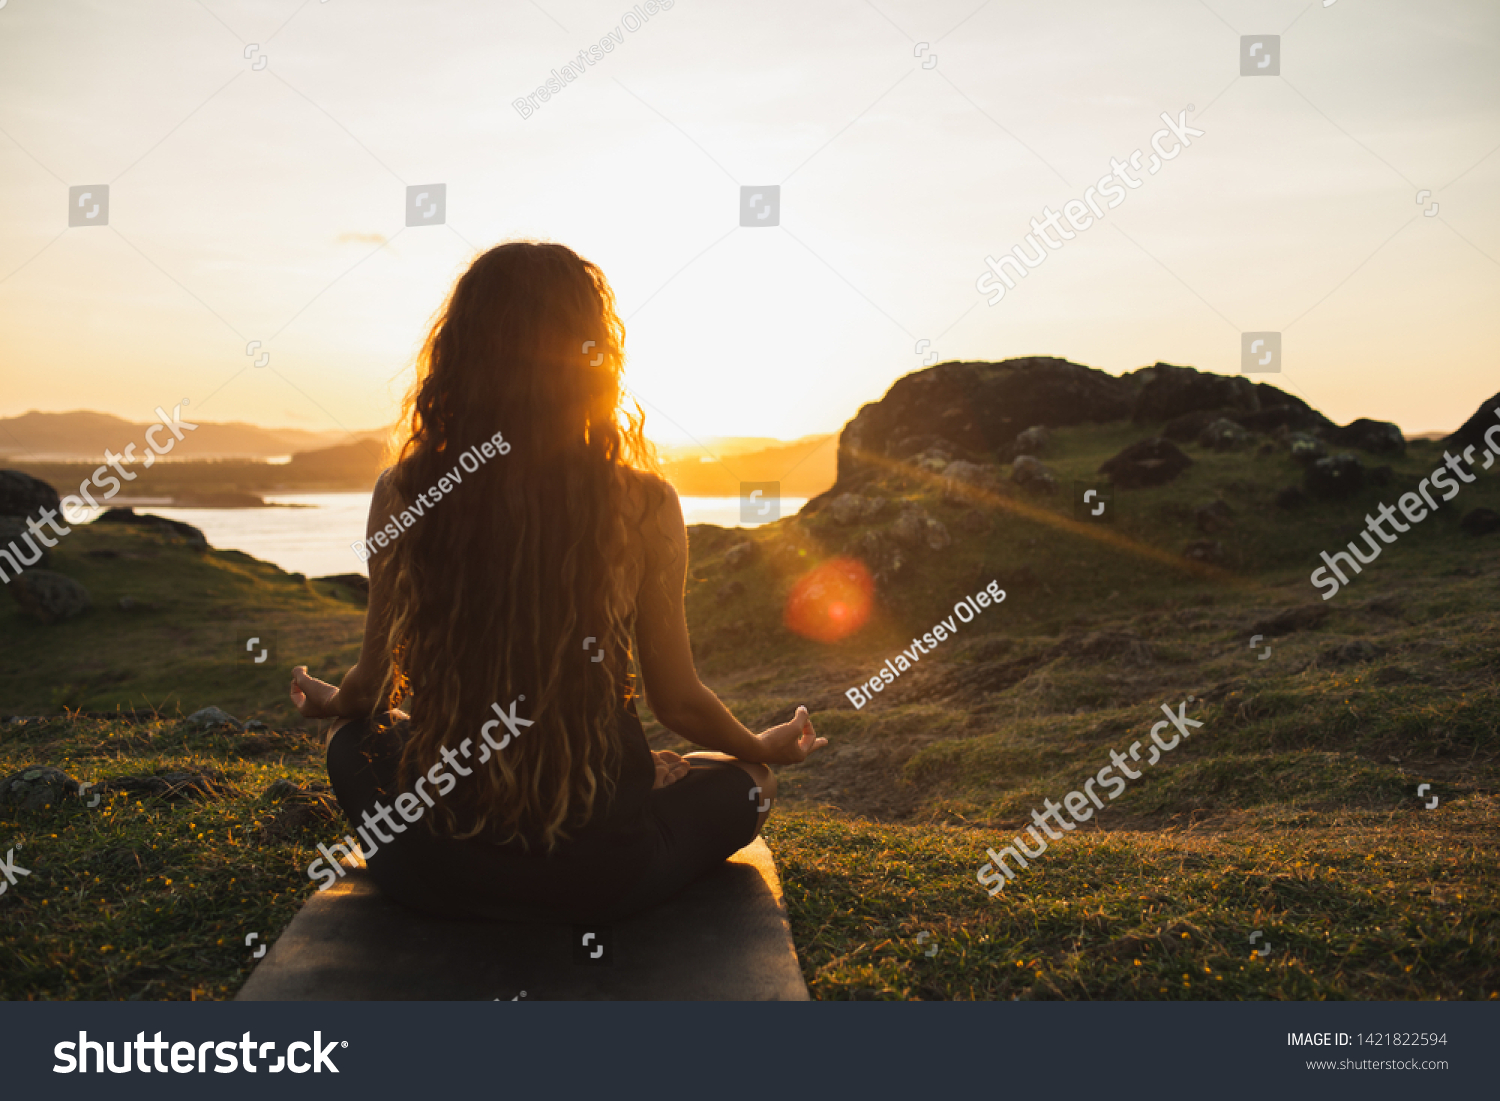 Woman meditating yoga alone at sunrise mountains. View from behind. Travel Lifestyle spiritual relaxation concept. Harmony with nature. #1421822594